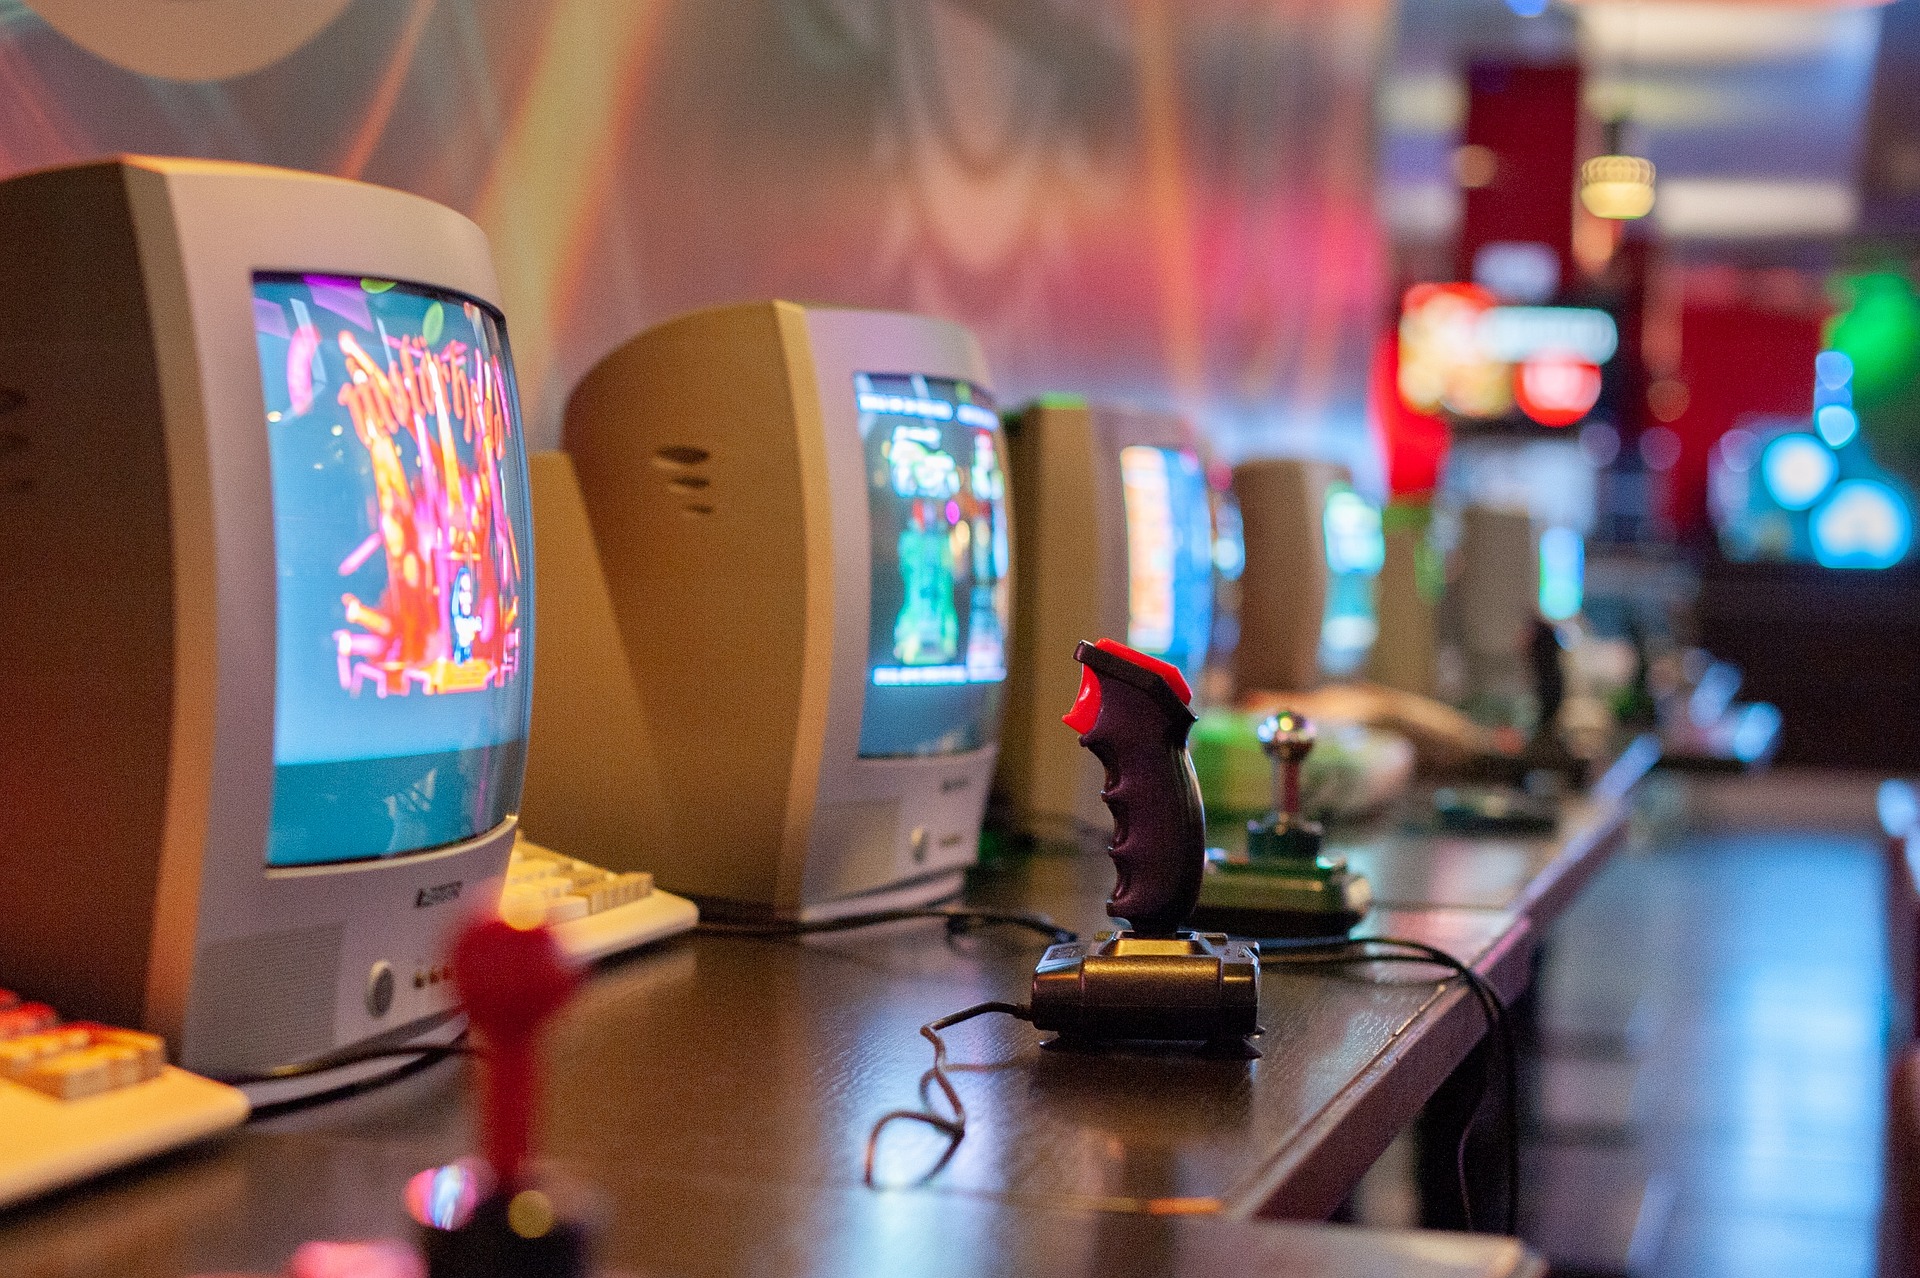 CRT TV screens with old gaming joysticks set up along a wooden desk, with retro video games running